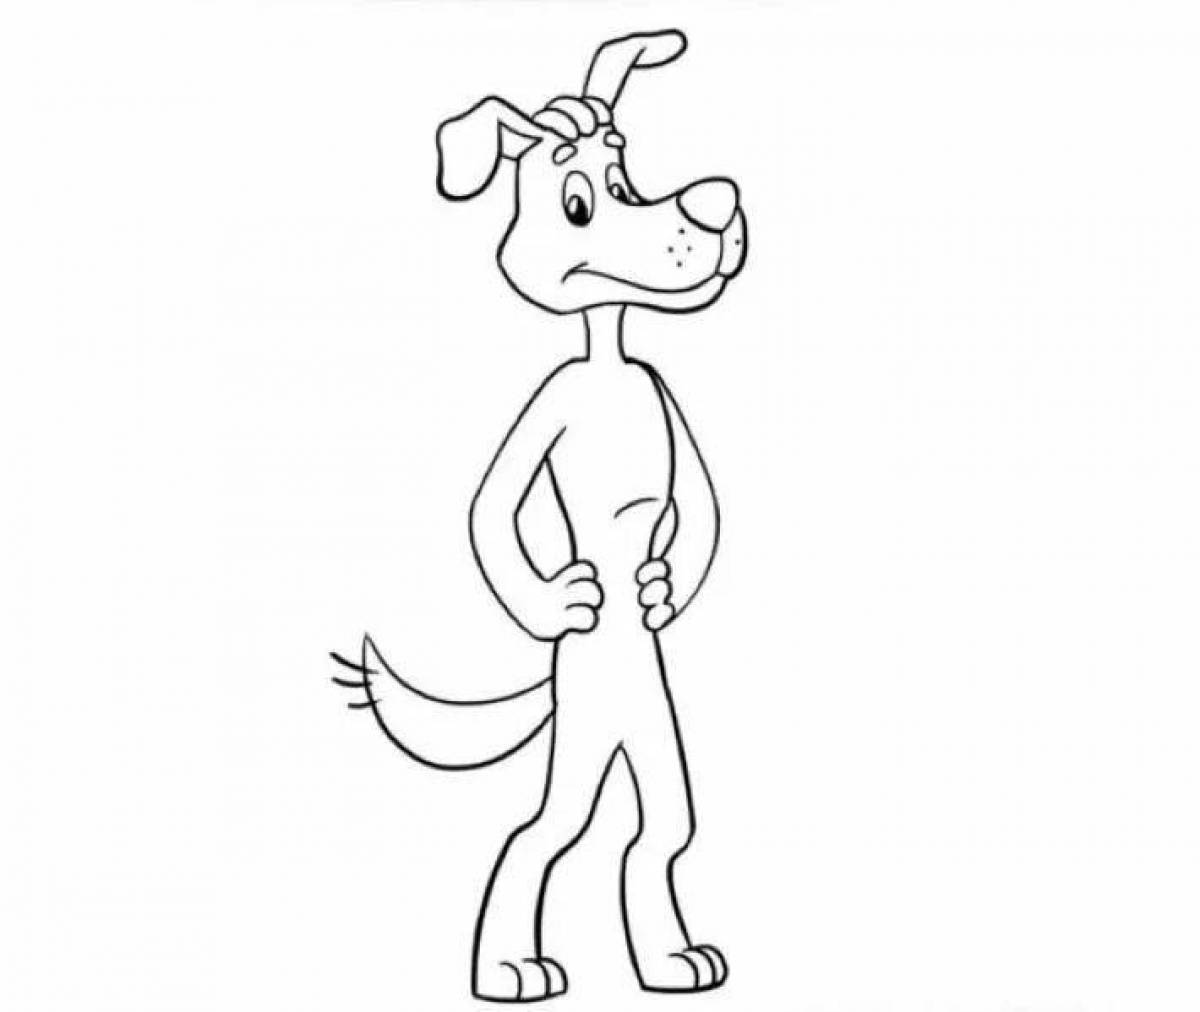 Buttermilk party coloring page